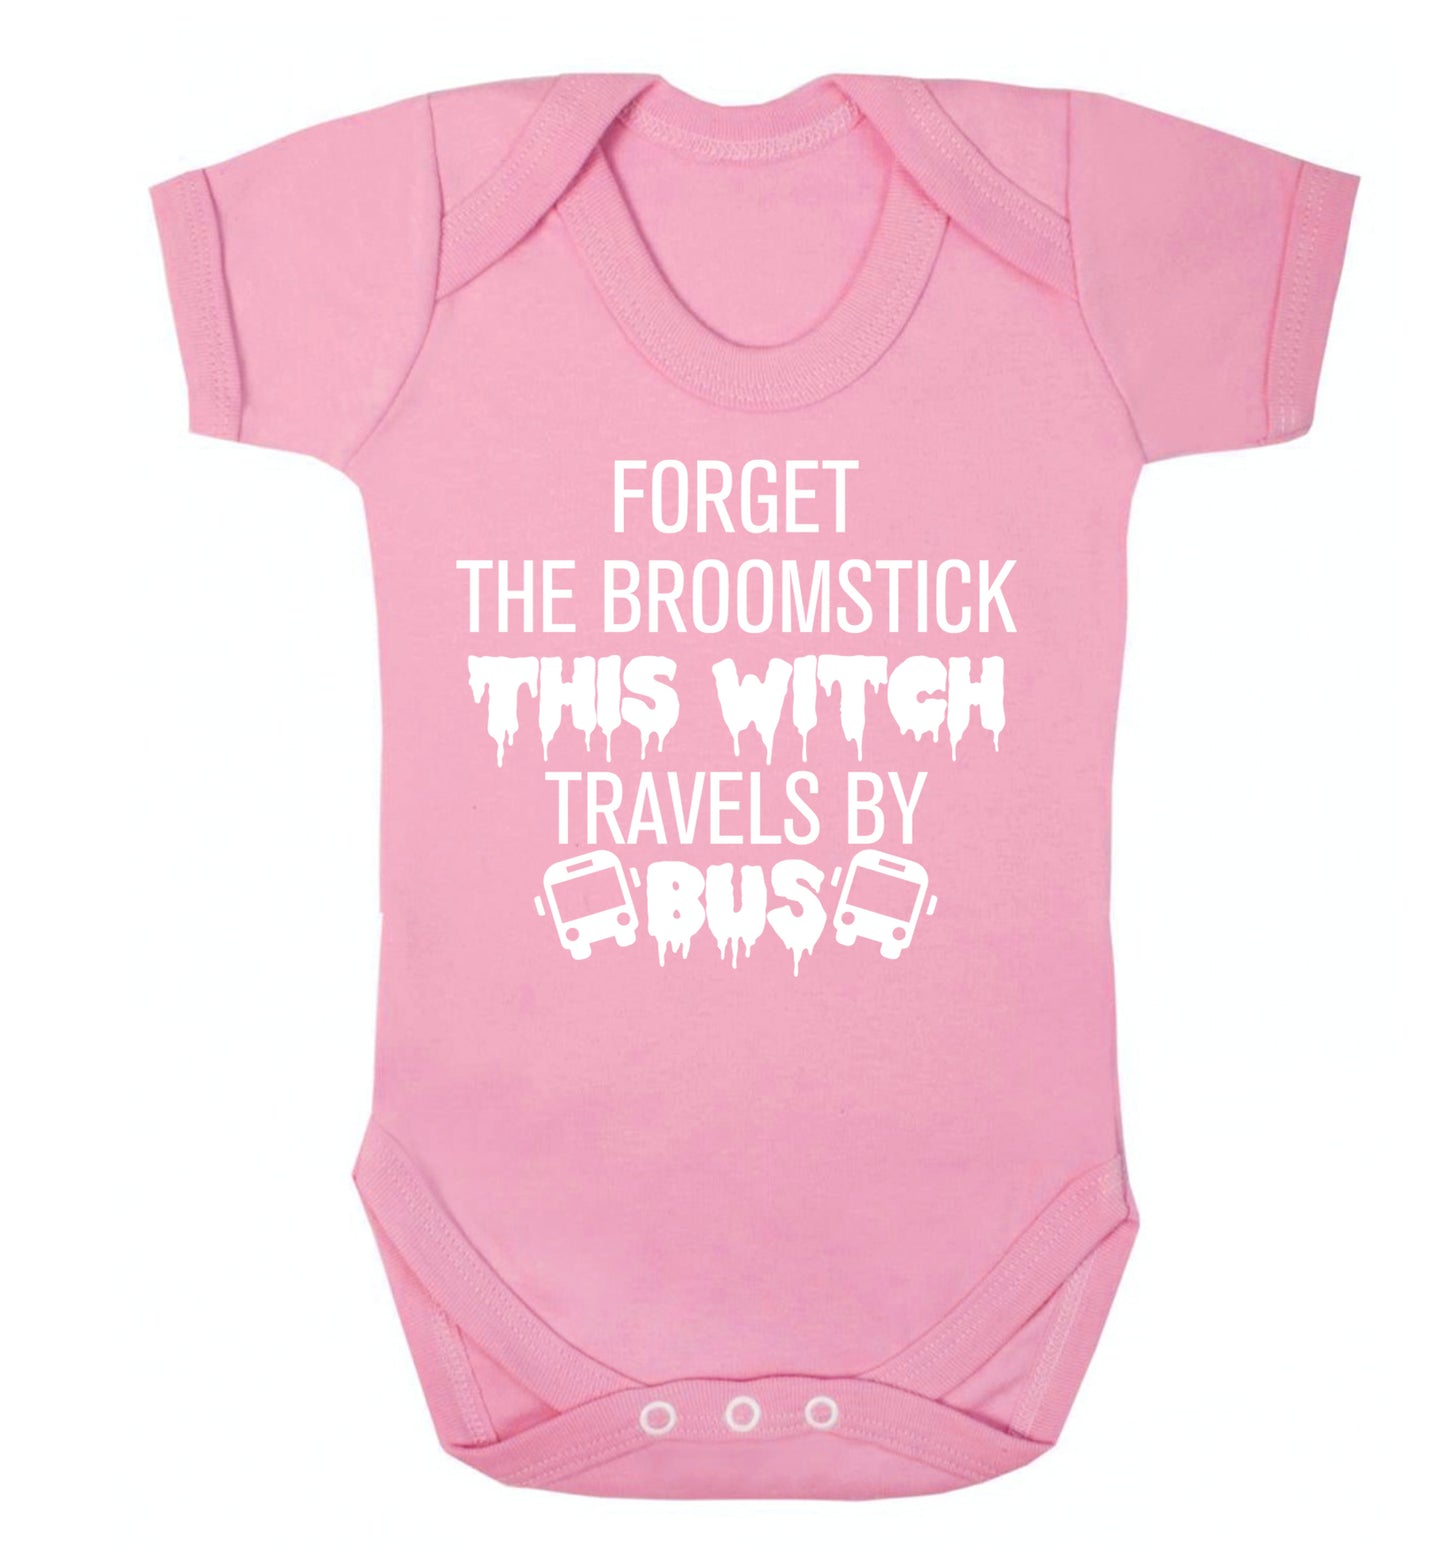 Forget the broomstick this witch travels by bus Baby Vest pale pink 18-24 months